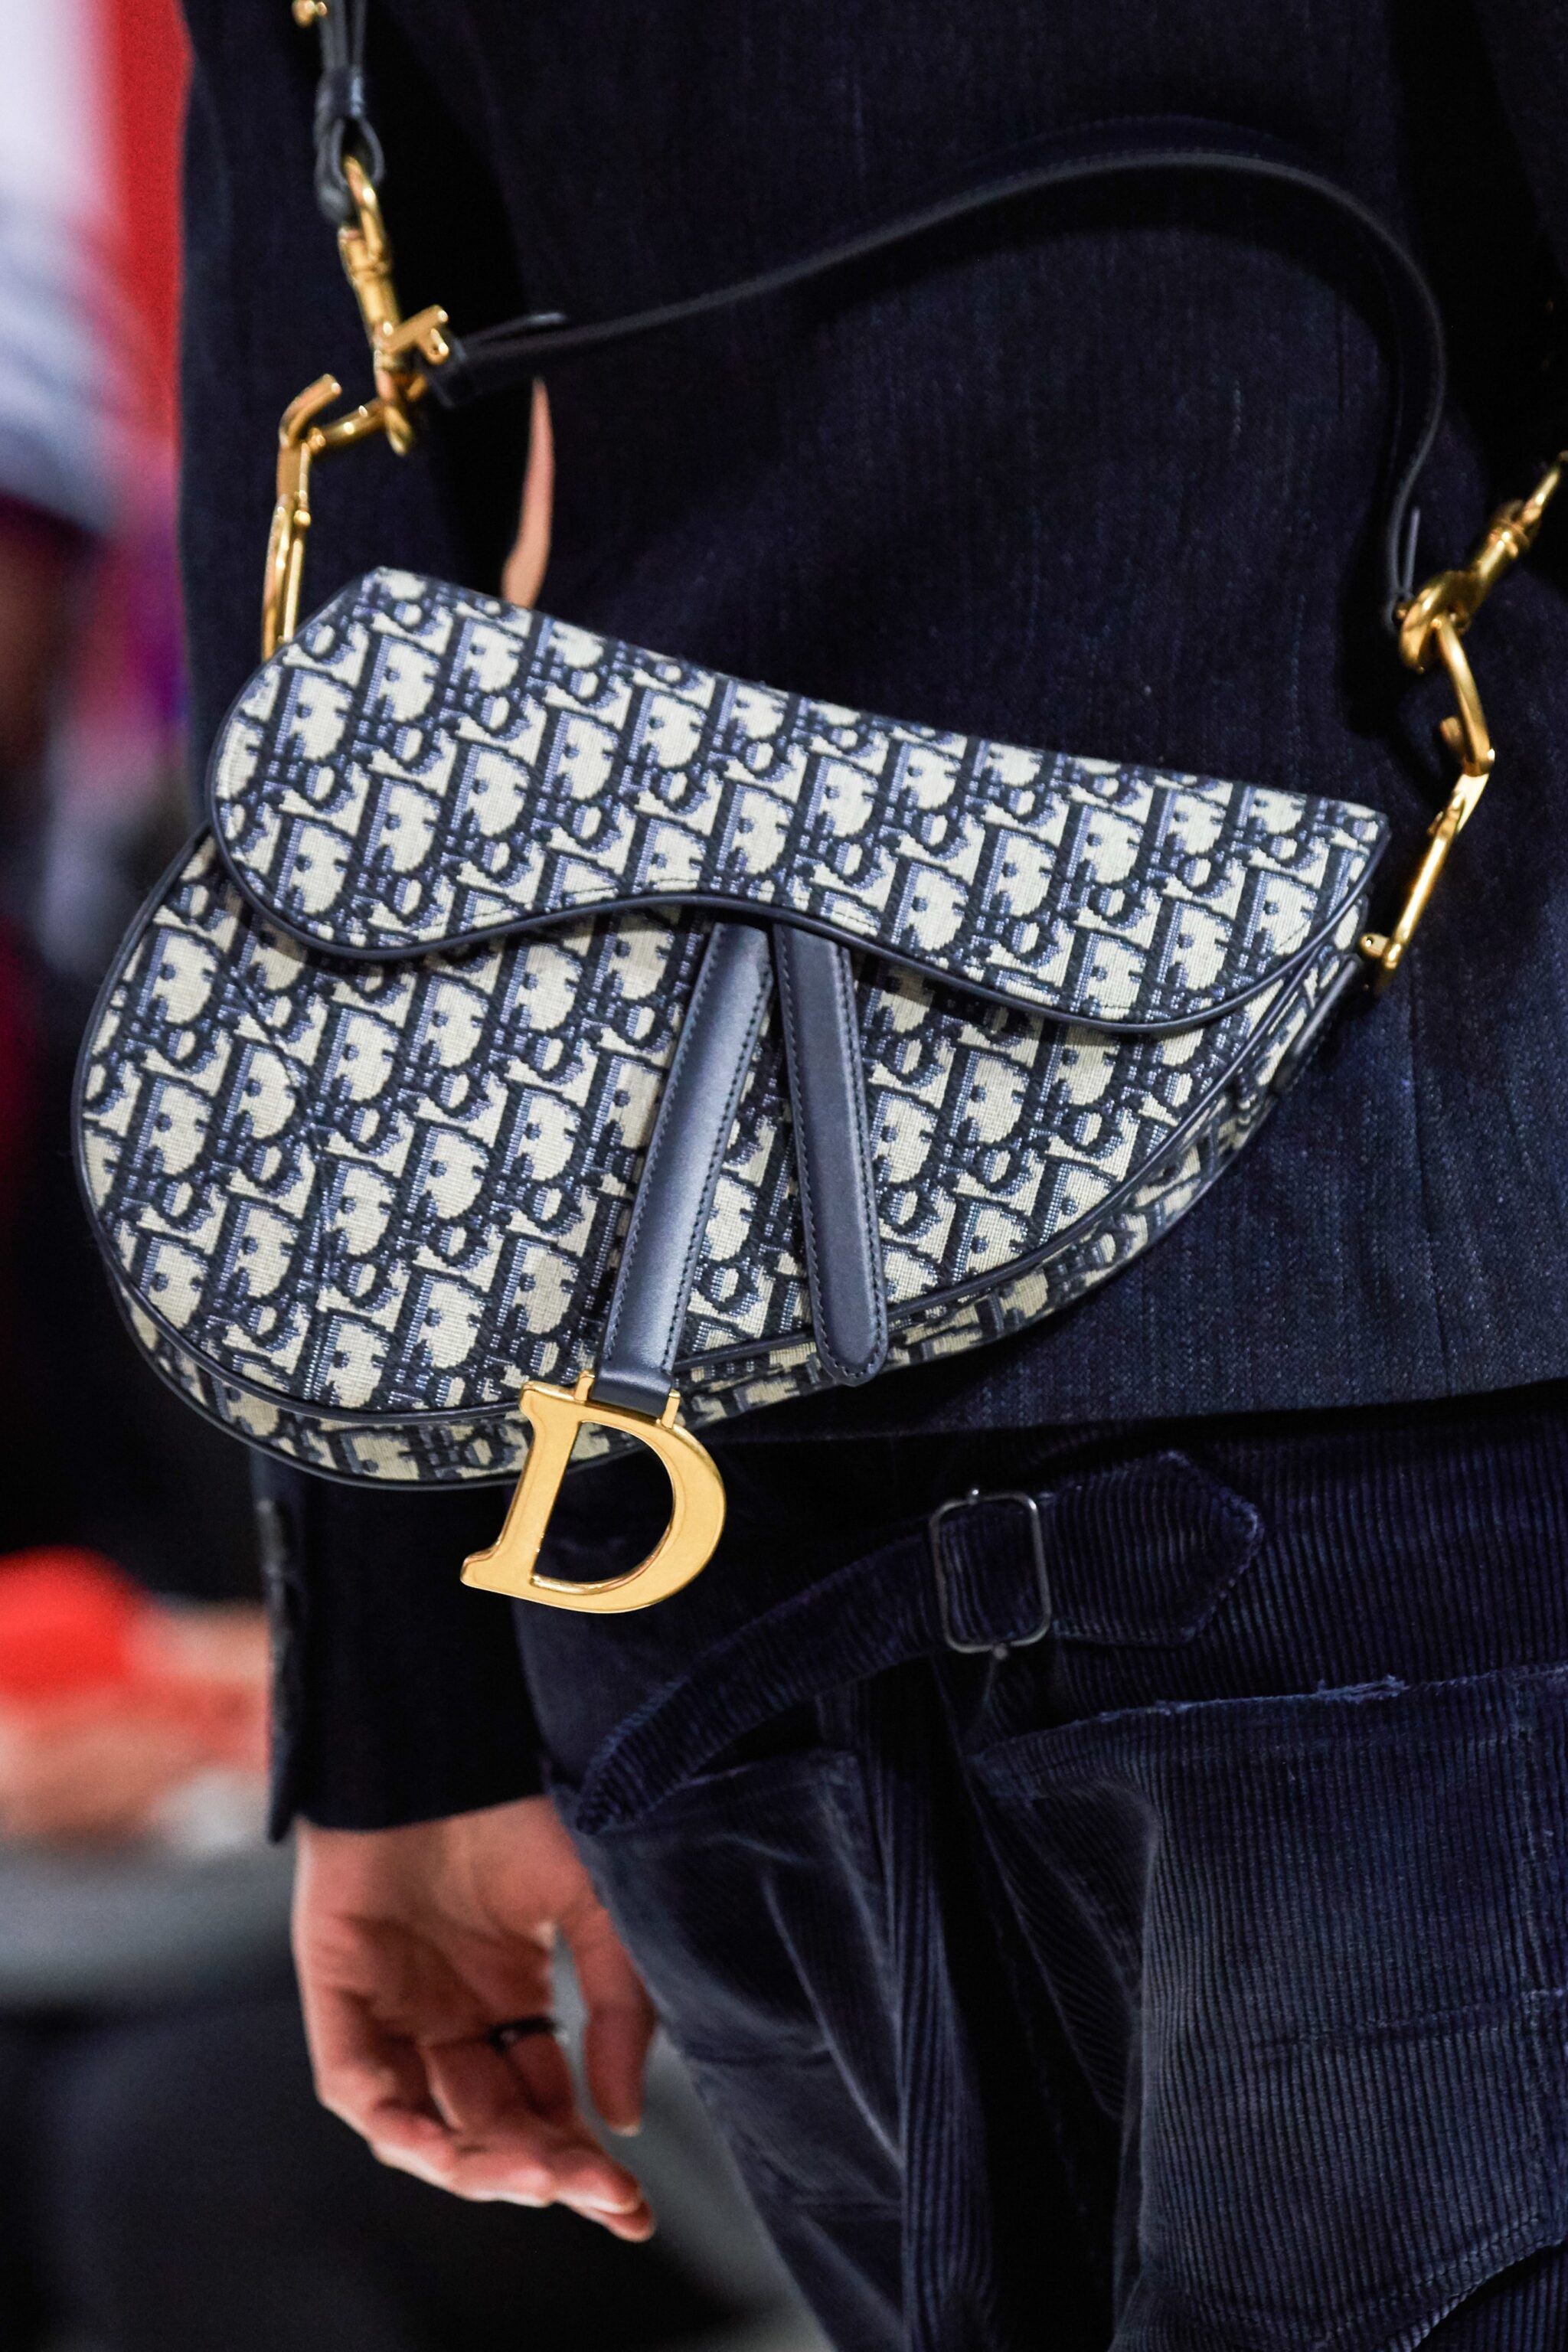 Dior Fall/Winter 2019 Runway Bag Collection | Spotted Fashion